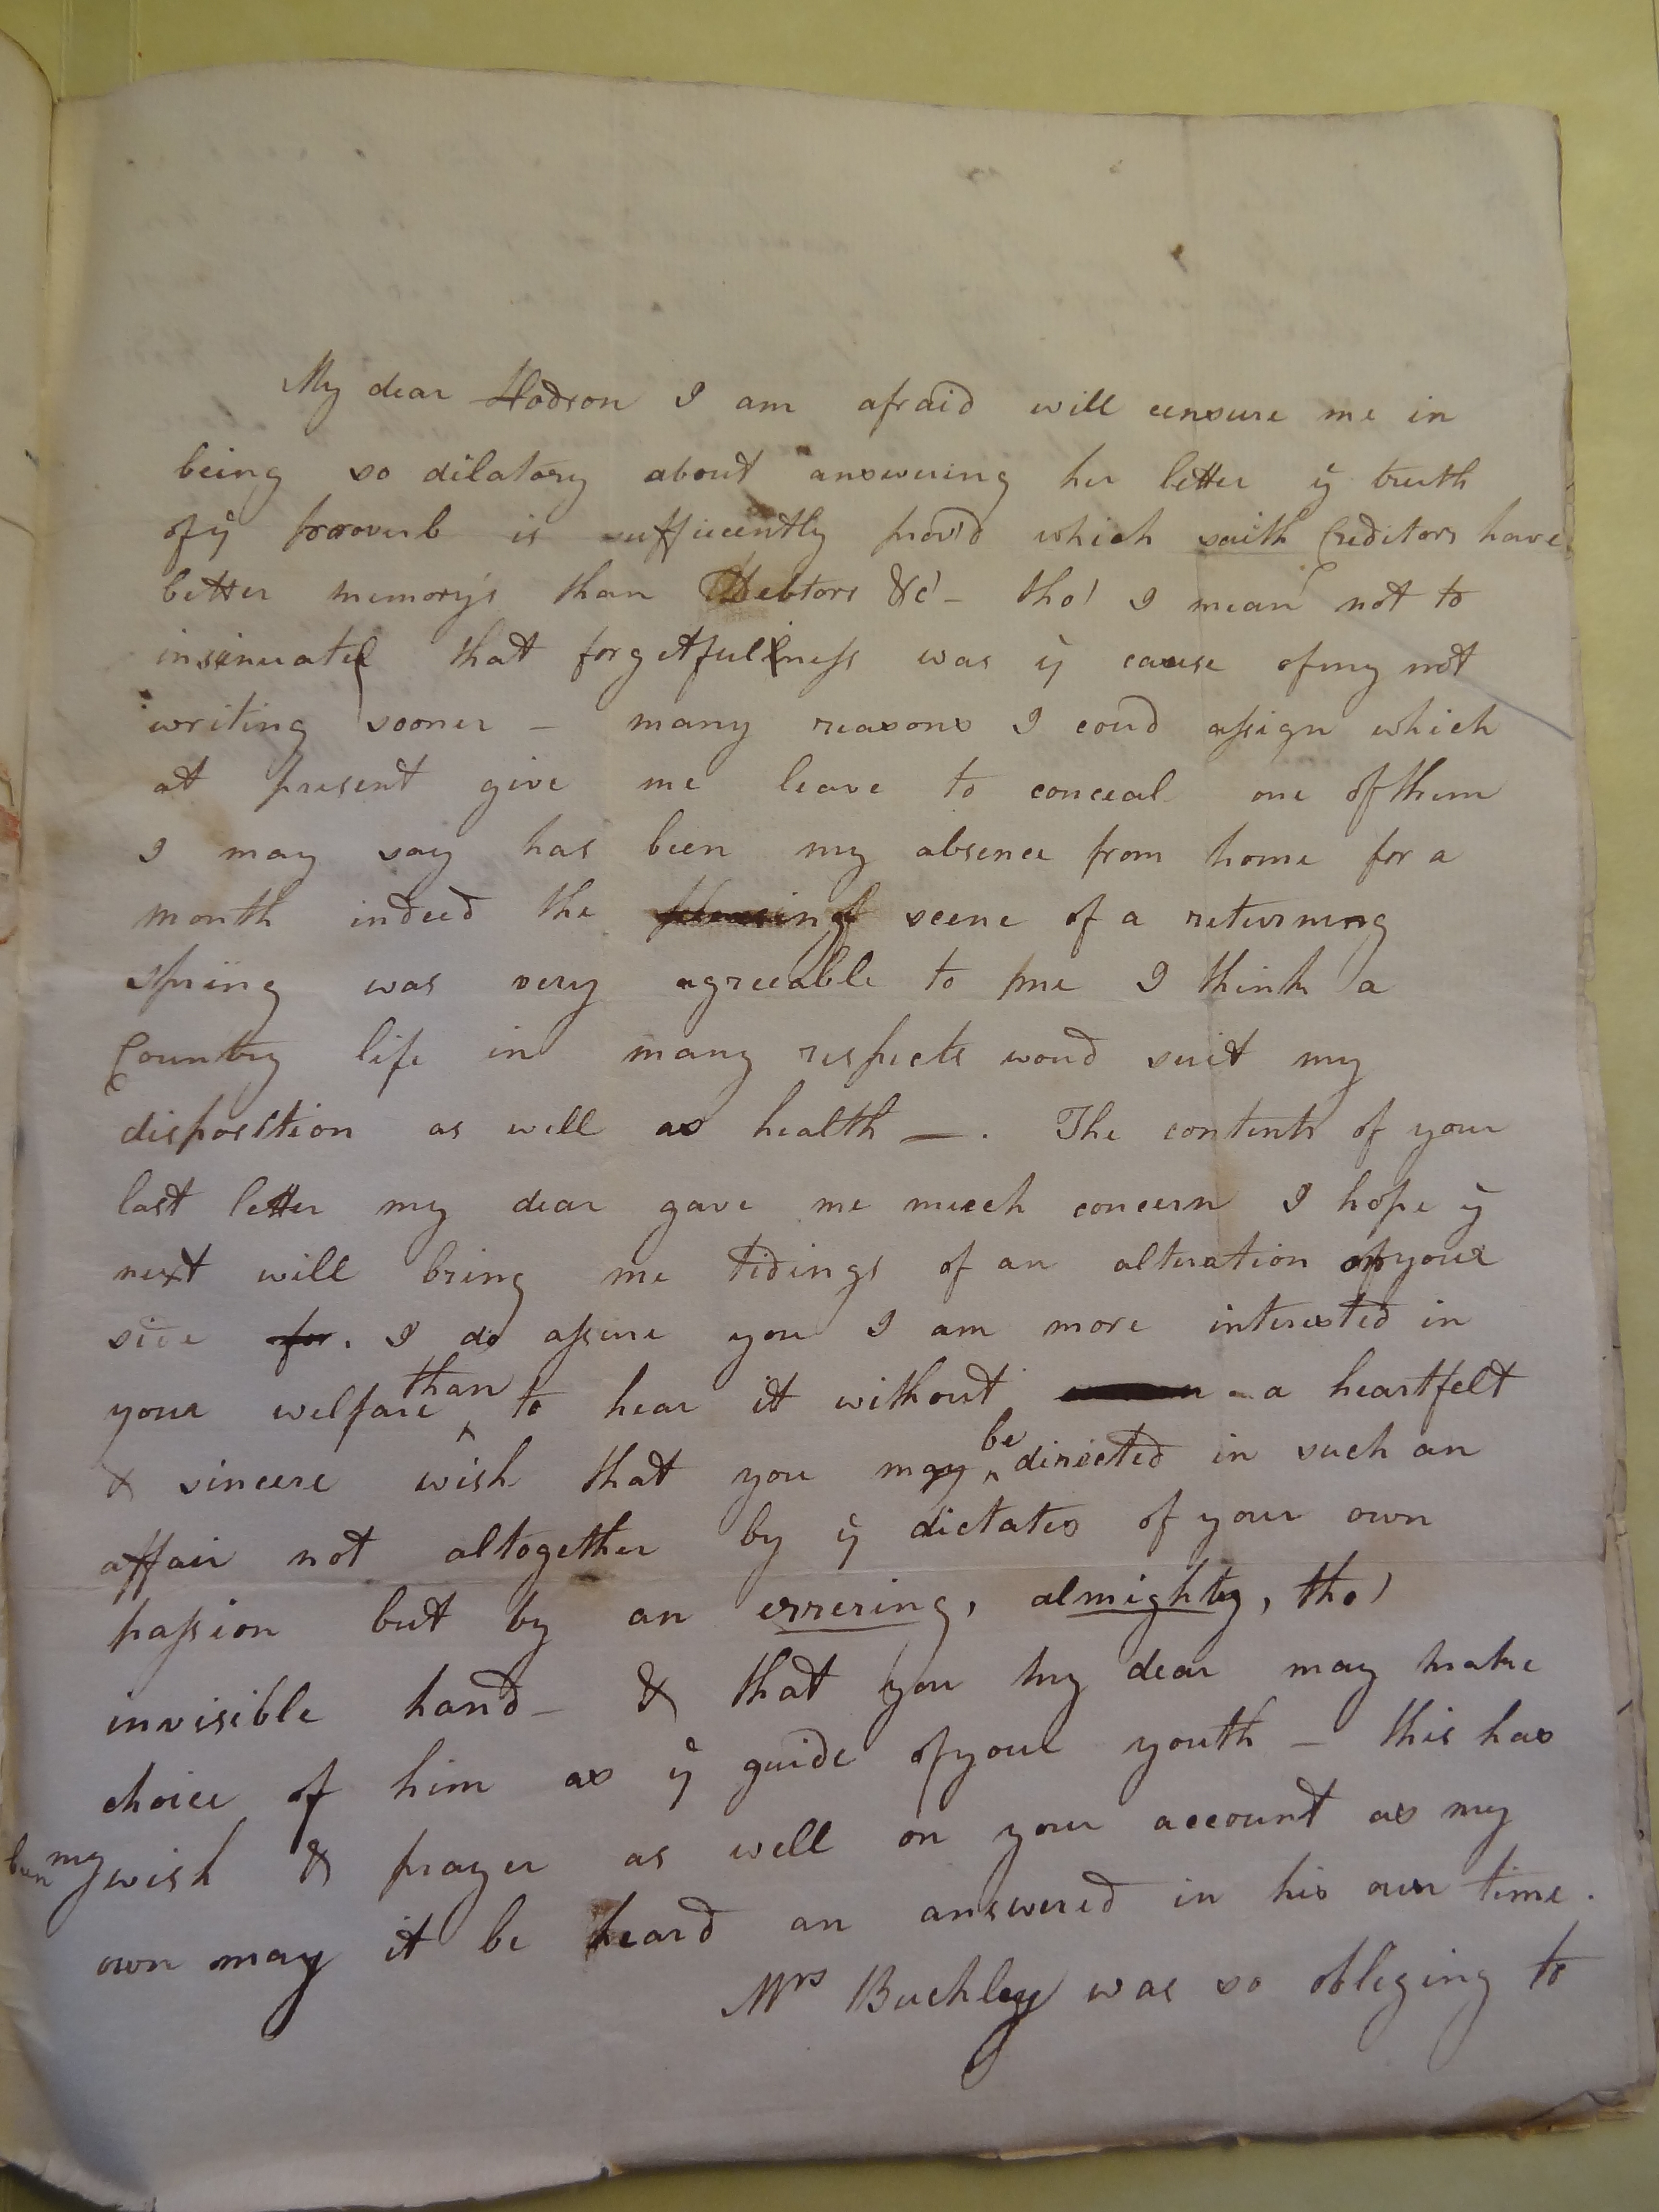 Image #1 of letter: Rebekah Bateman to Mary Jane Hodson, 31 May 1783